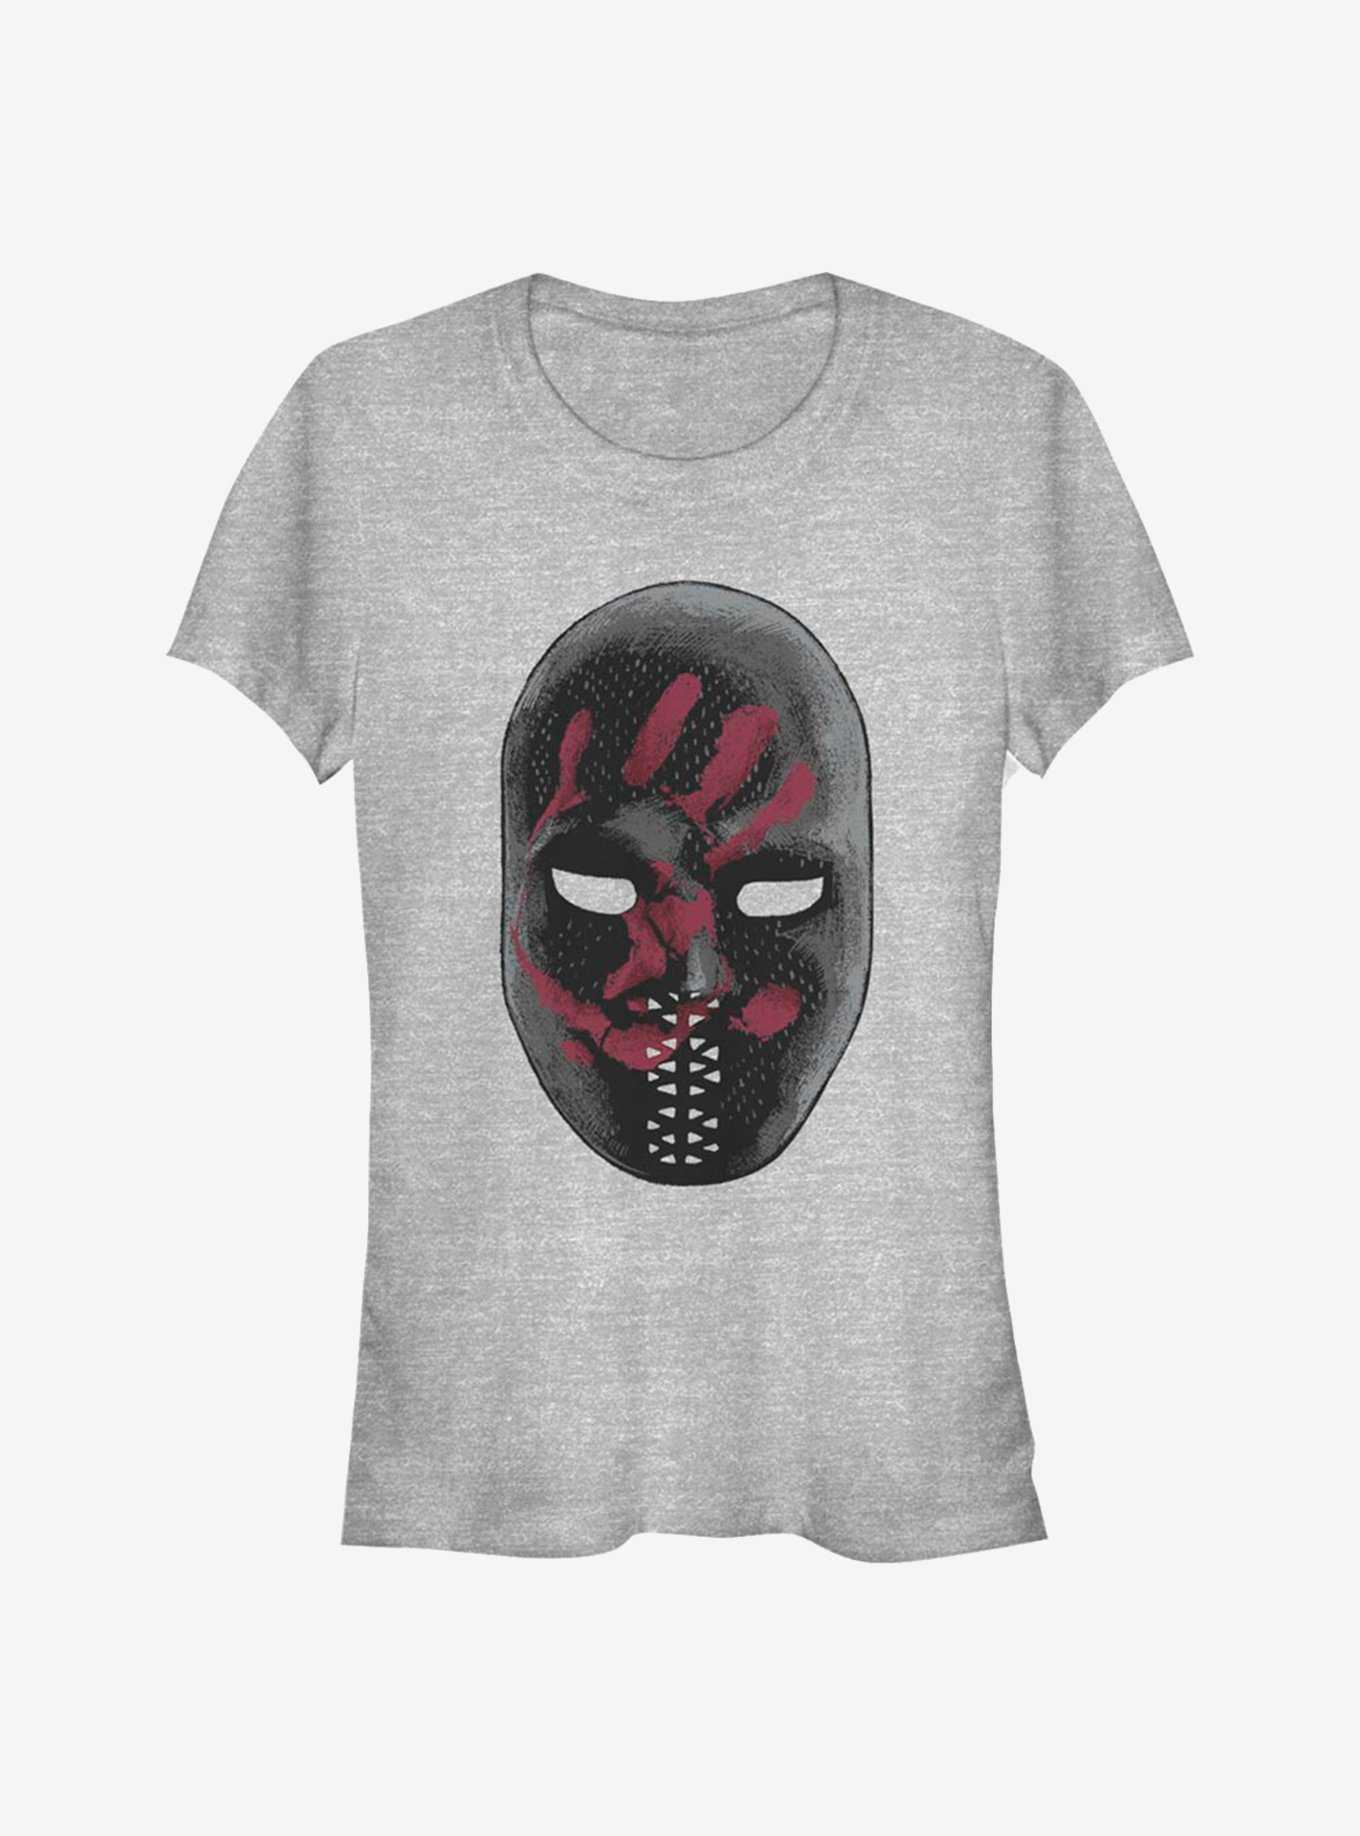 Marvel The Falcon And The Winter Soldier Flag Smashers Mask Girls T-Shirt, , hi-res